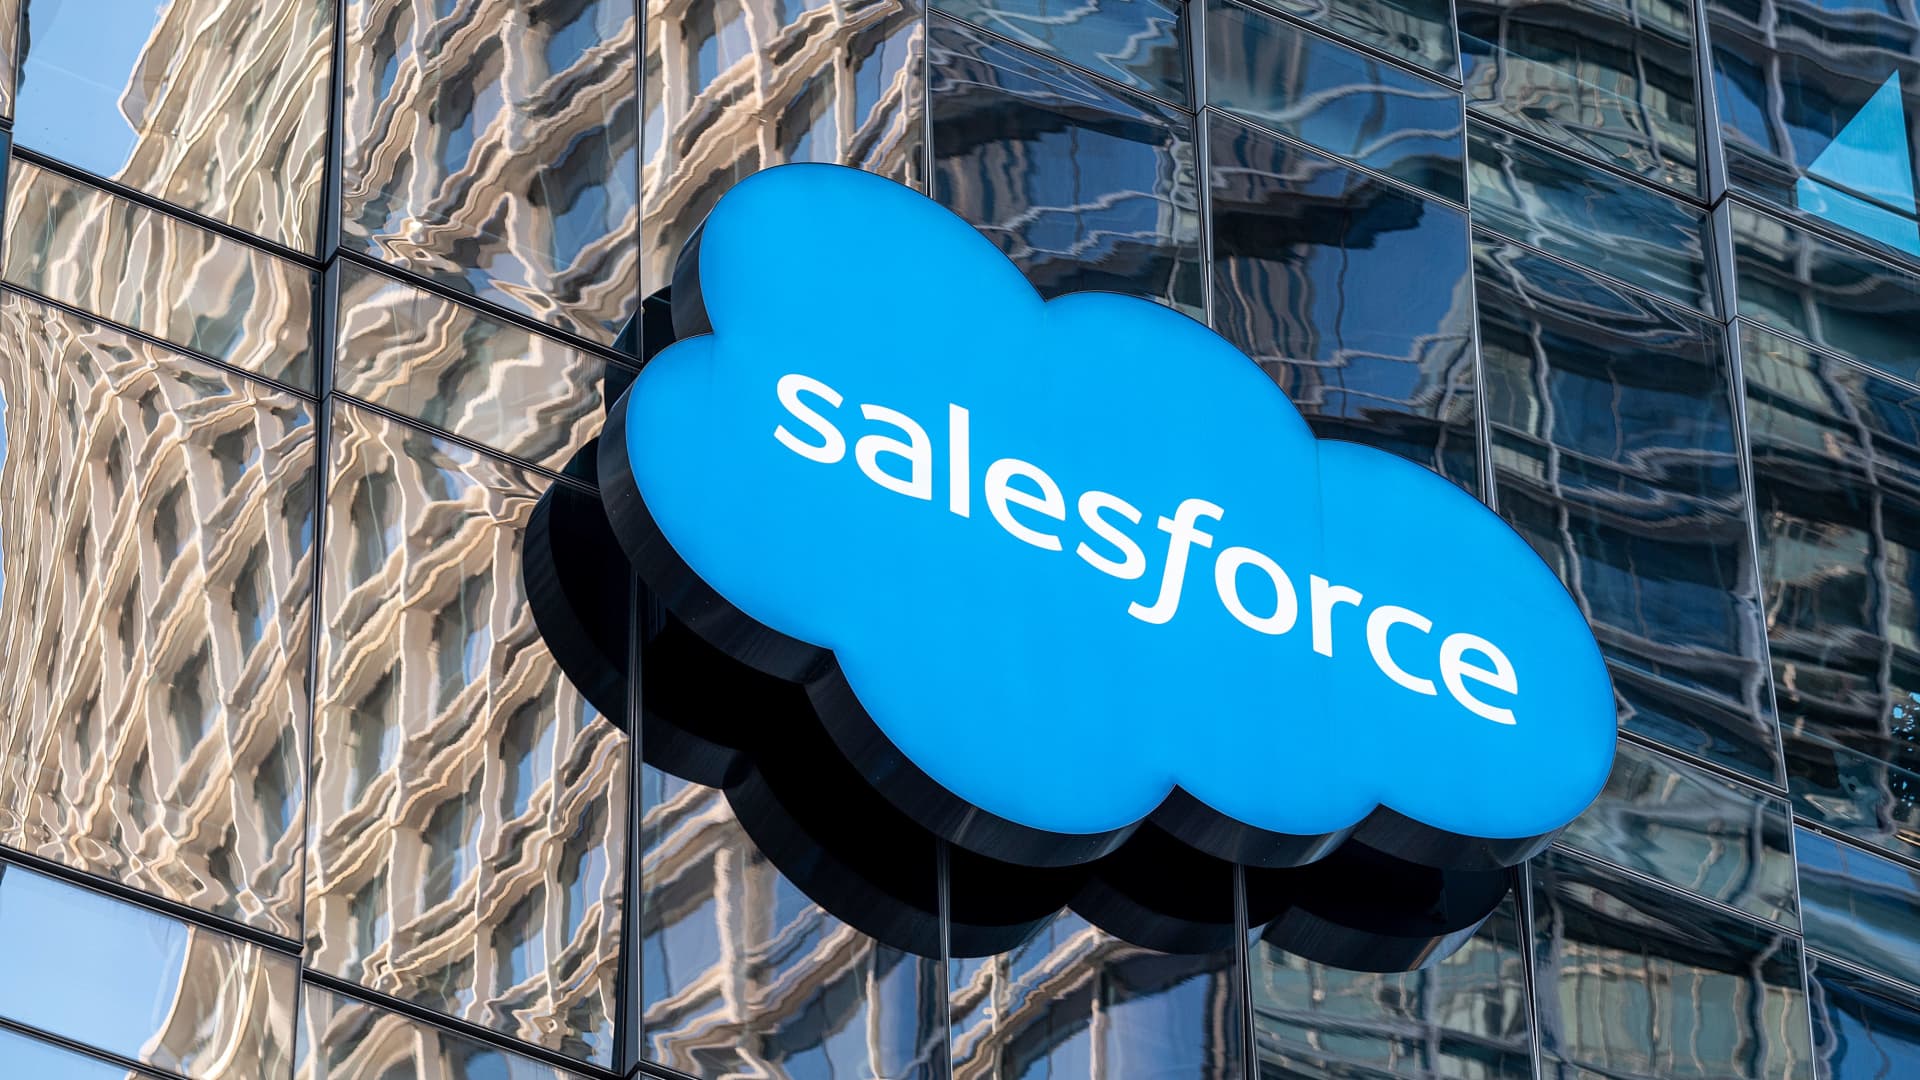 Jeff Ubben's Inclusive Capital takes stake in Salesforce as more activists target the software giant